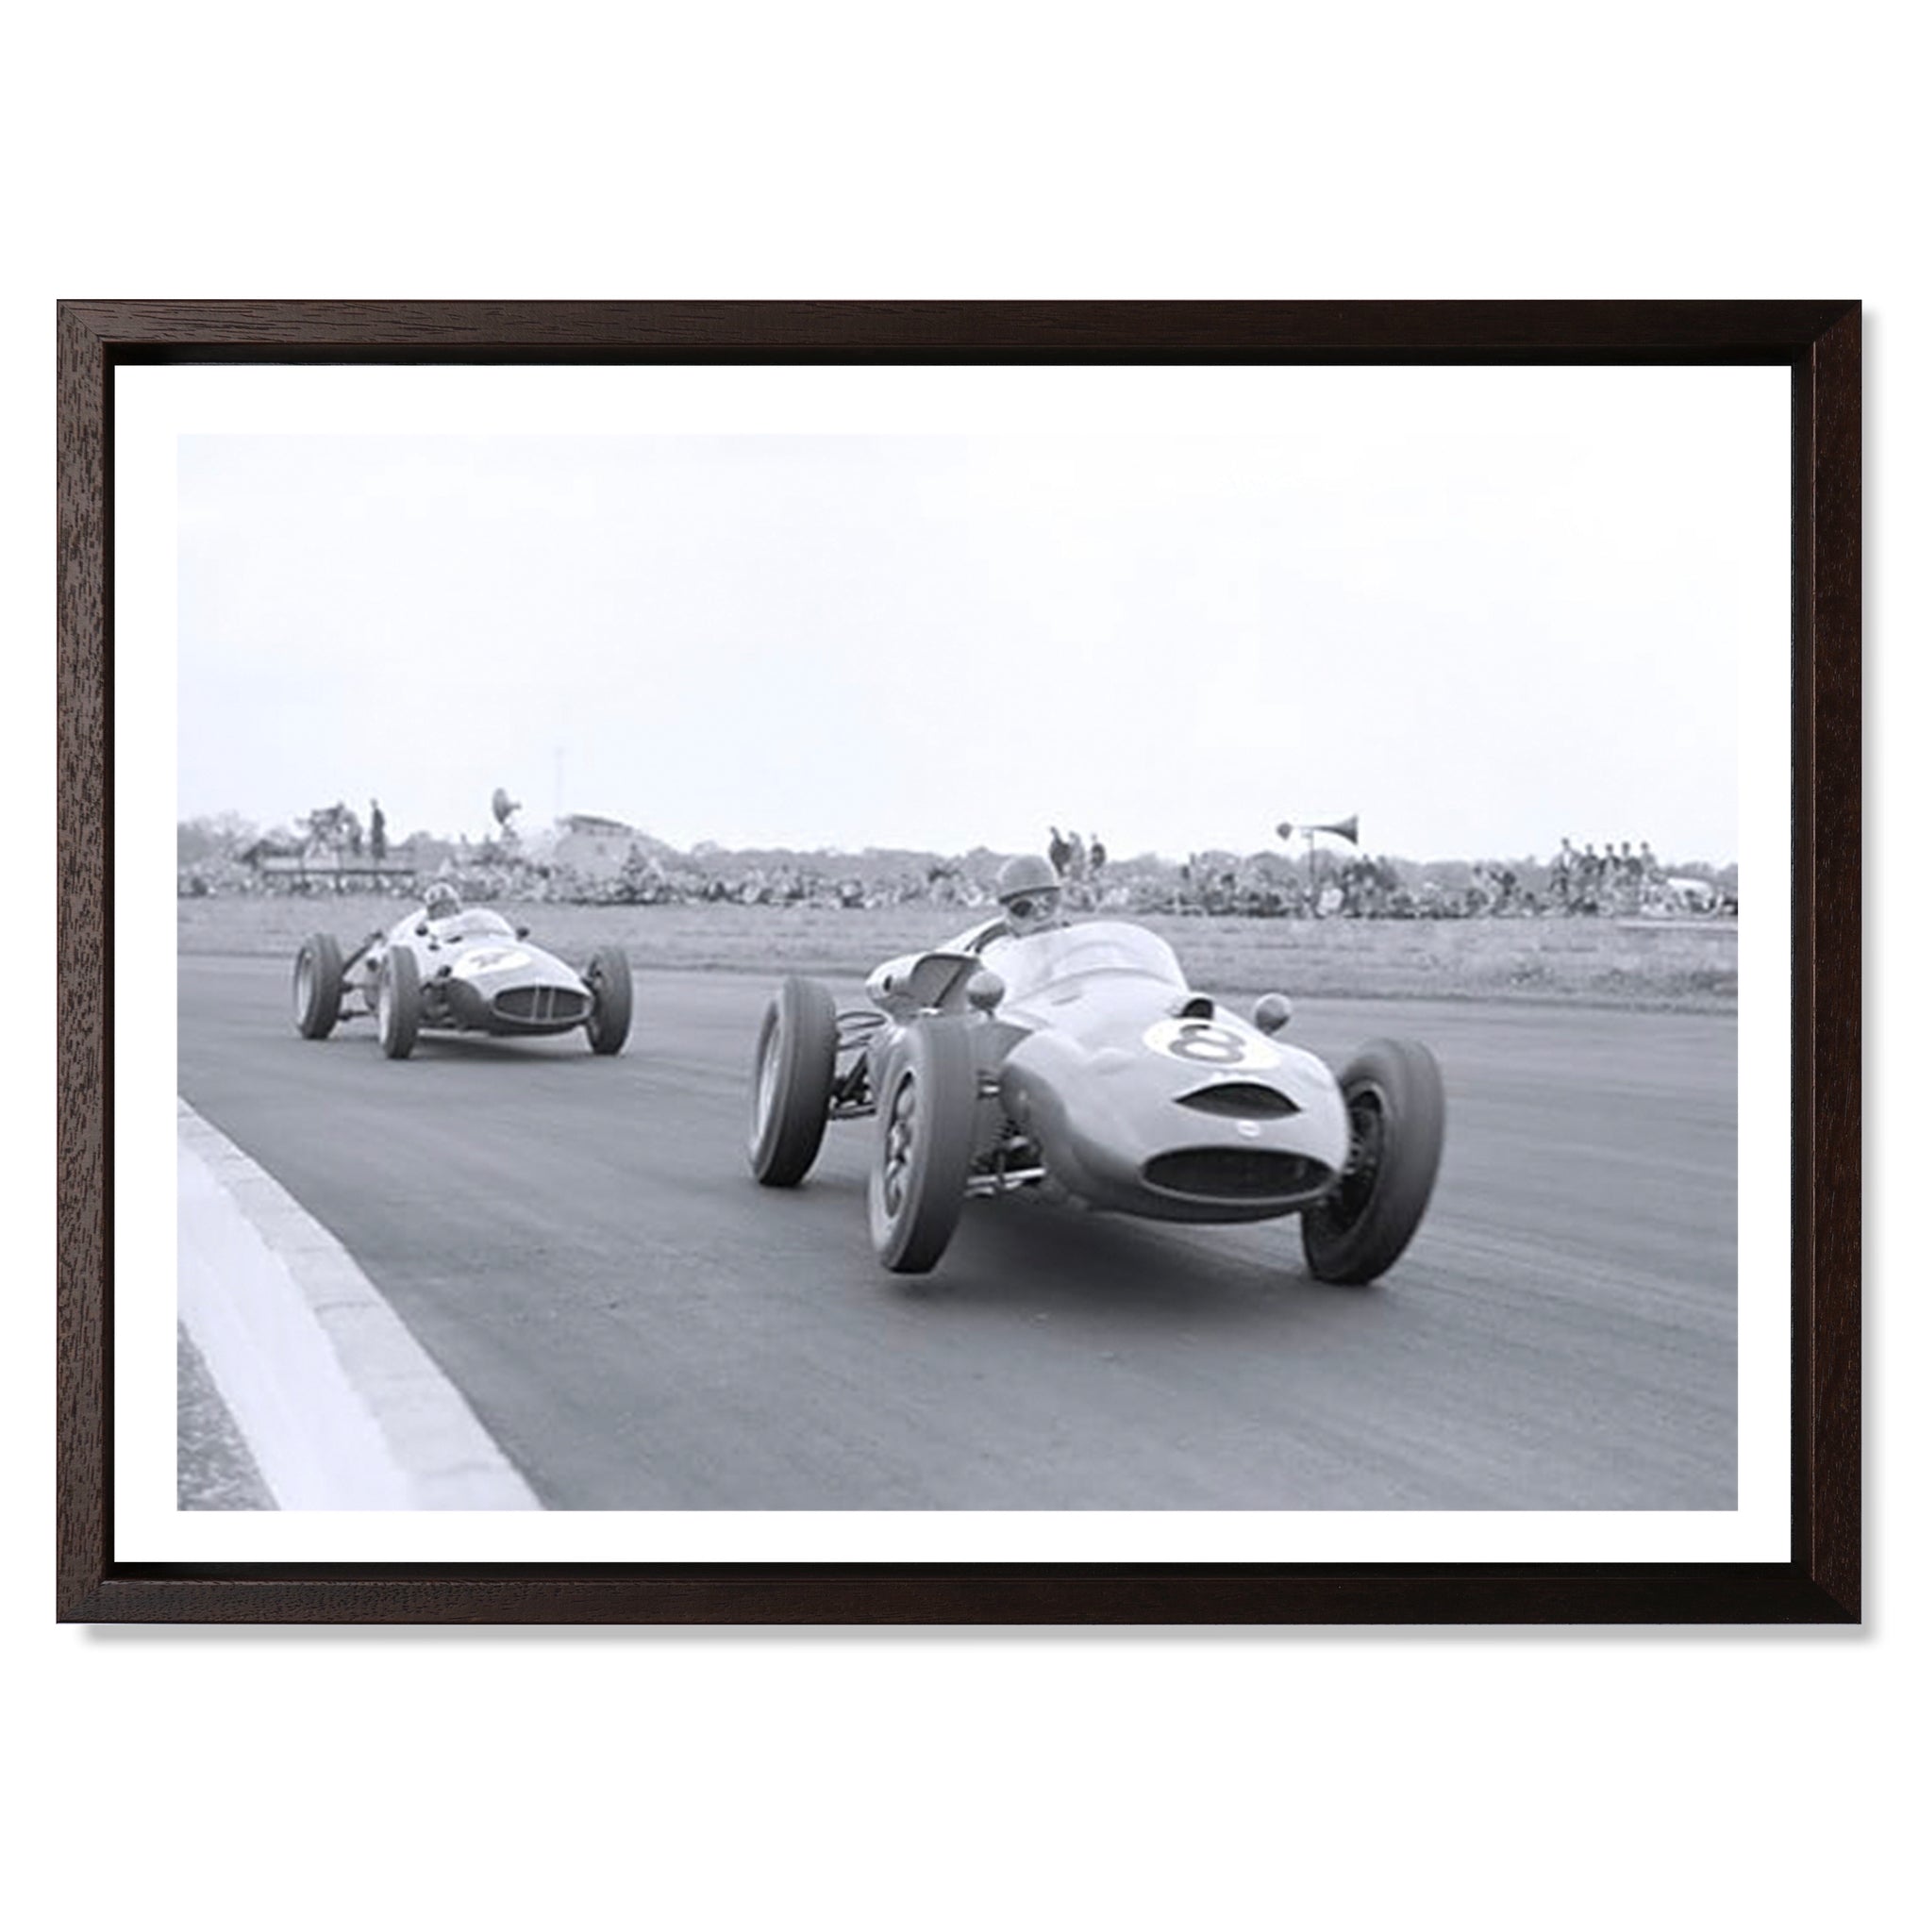 Graham Hill In Pursuit, Silverstone